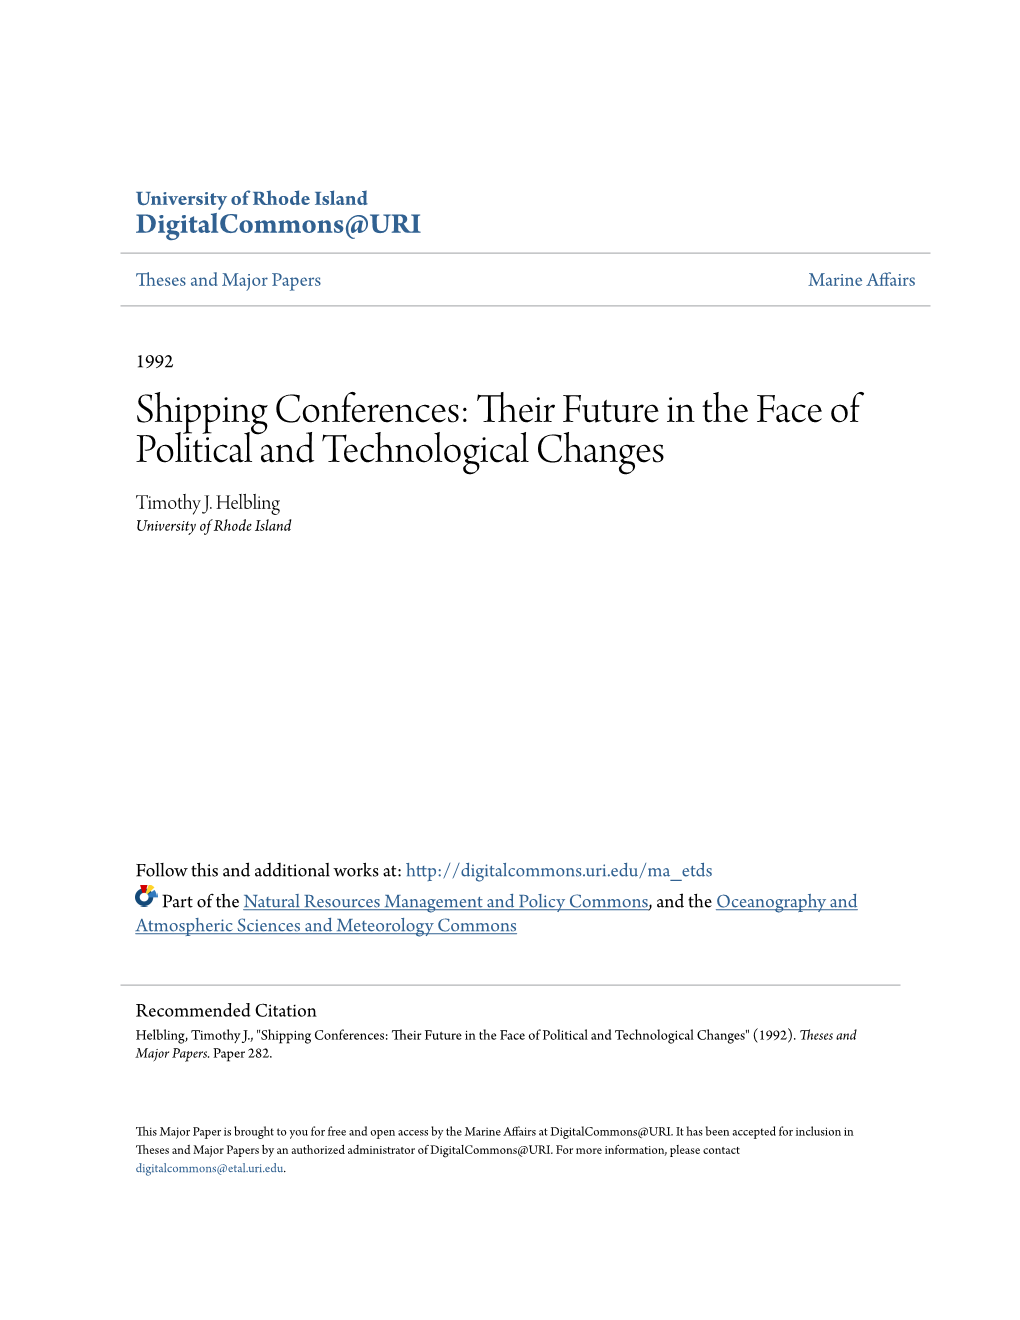 Shipping Conferences: Their Future in the Face of Political and Technological Change